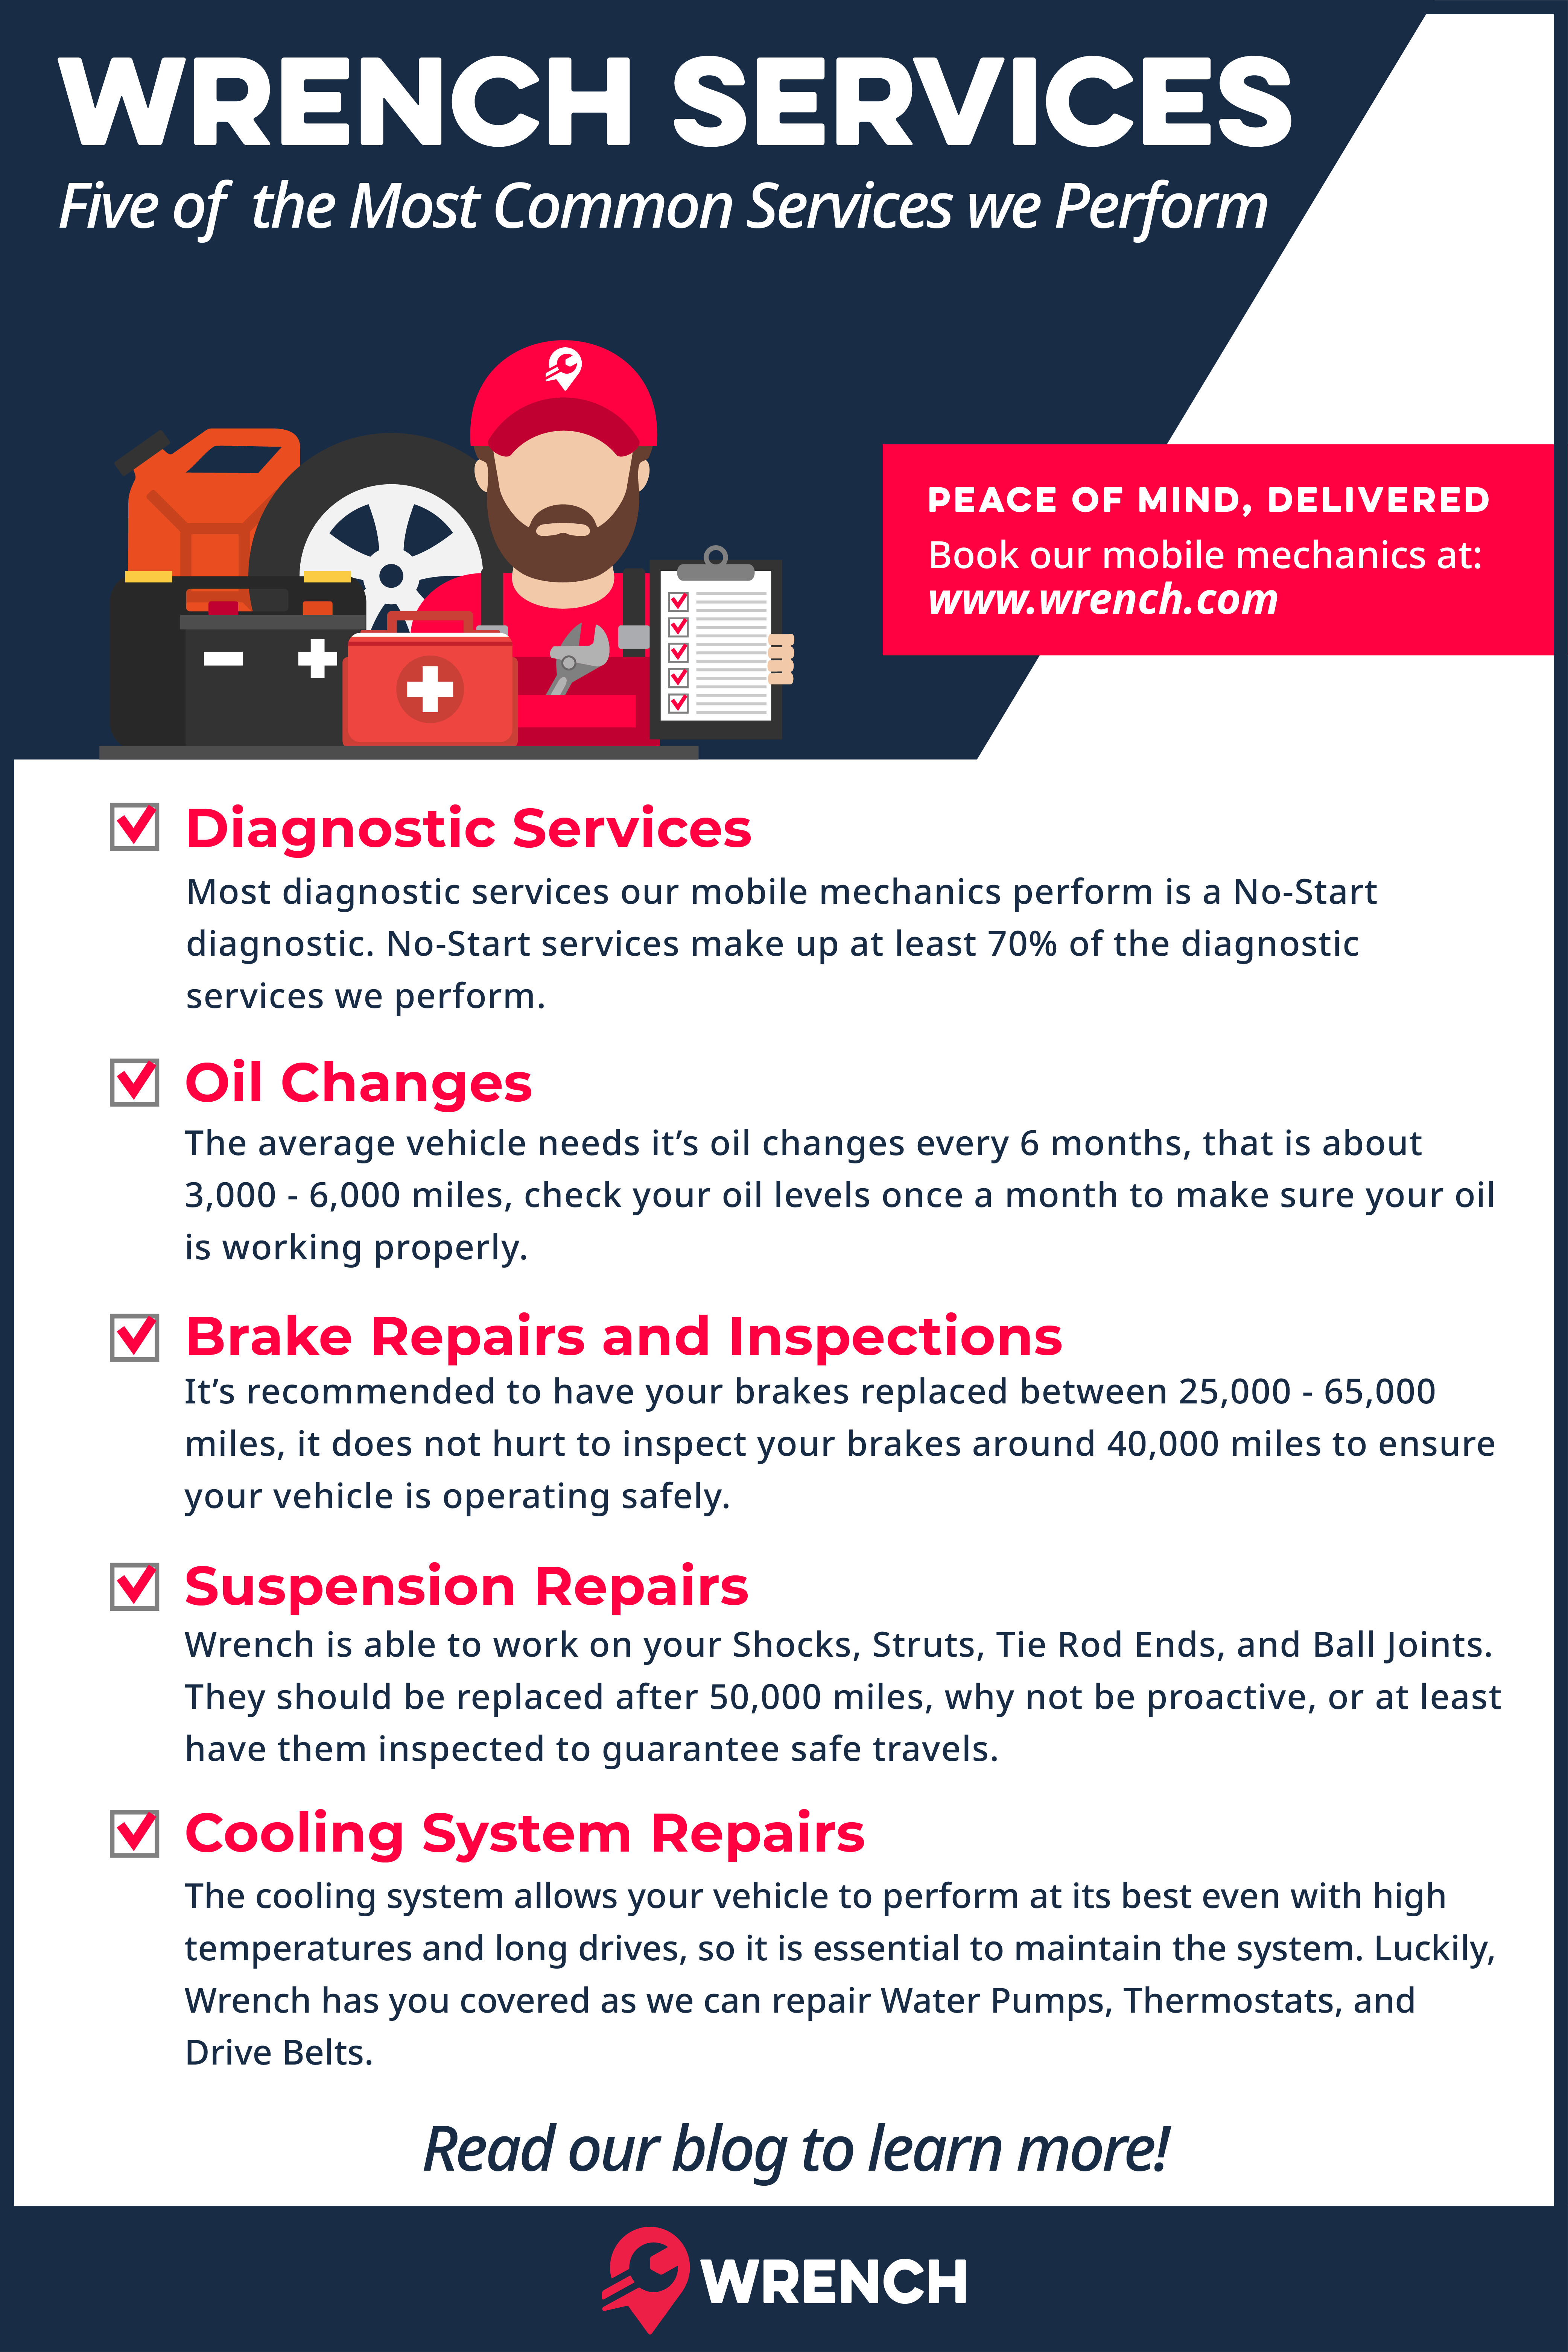 Wrench's most common services, from diagnostics, oil changes, brake repairs/inspections, and even cooling system repairs